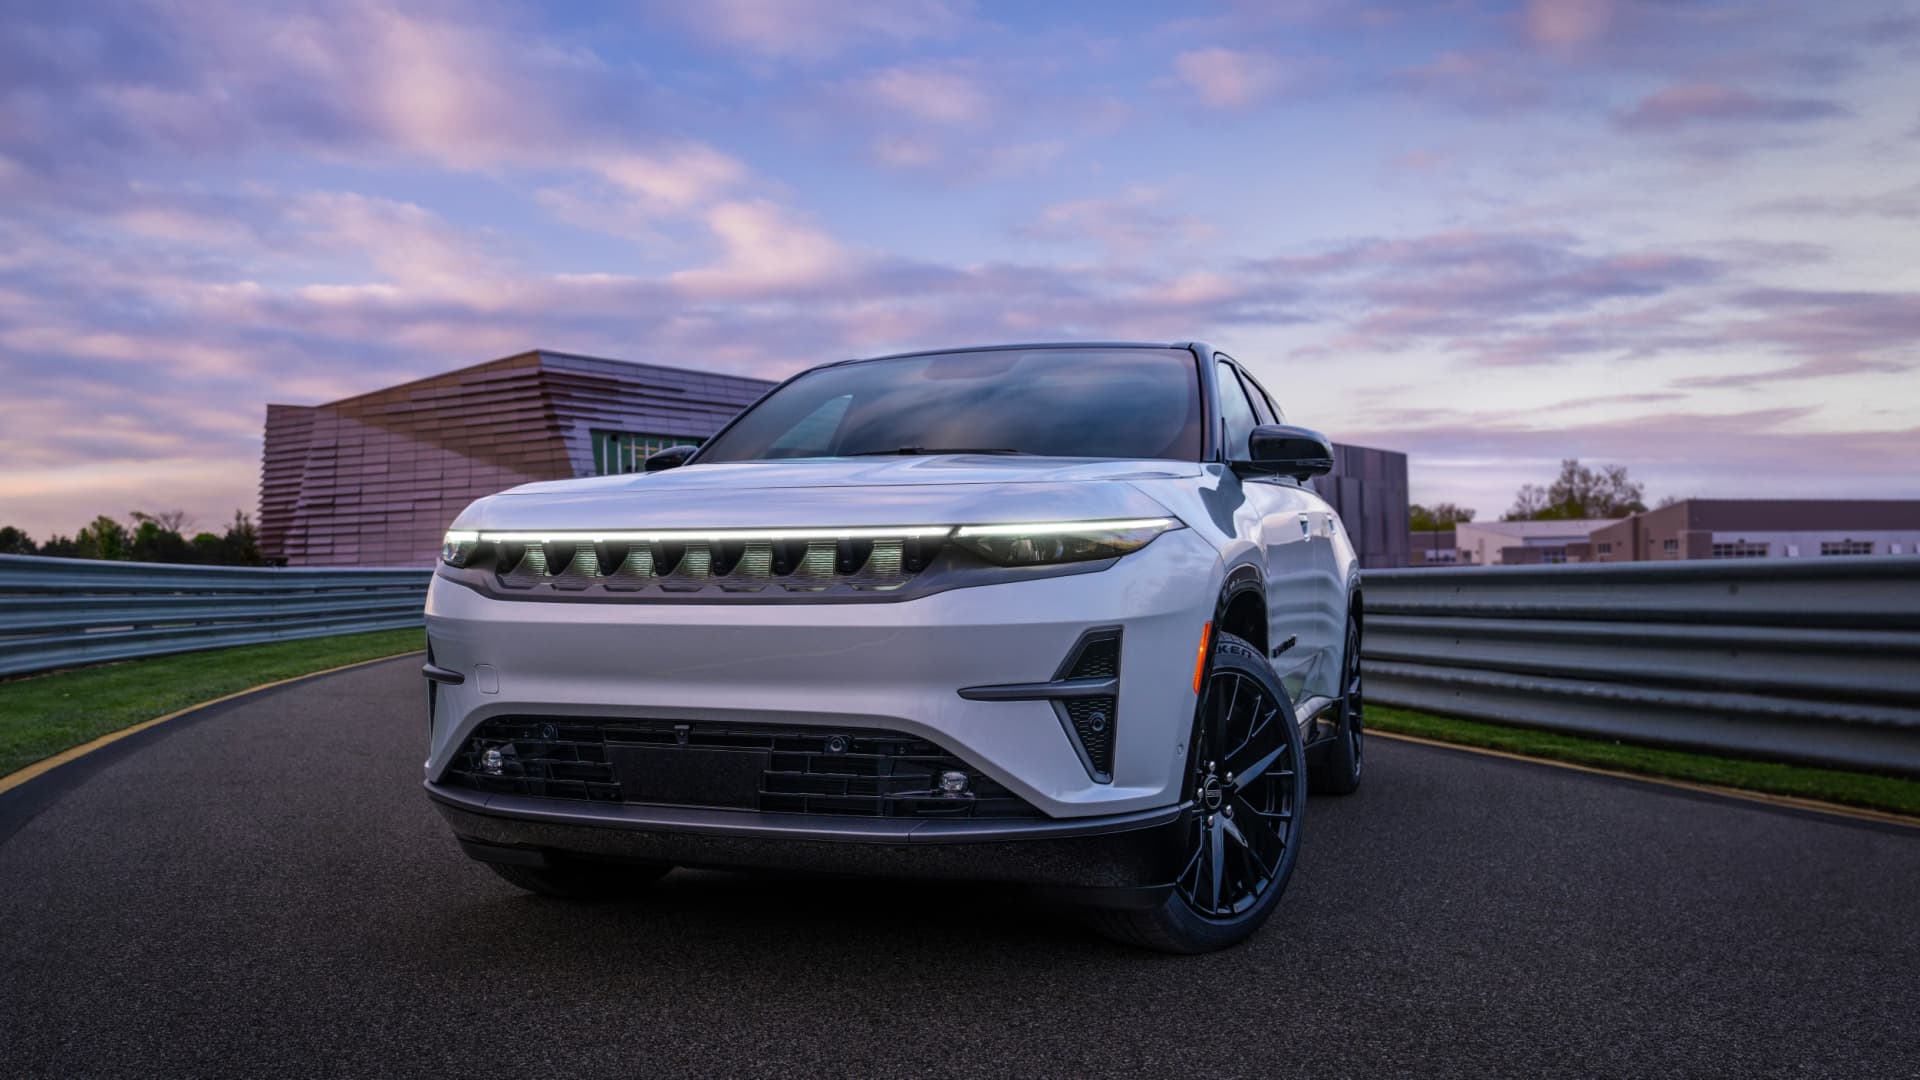 Jeep's world's first all-electric SUV for $72,000